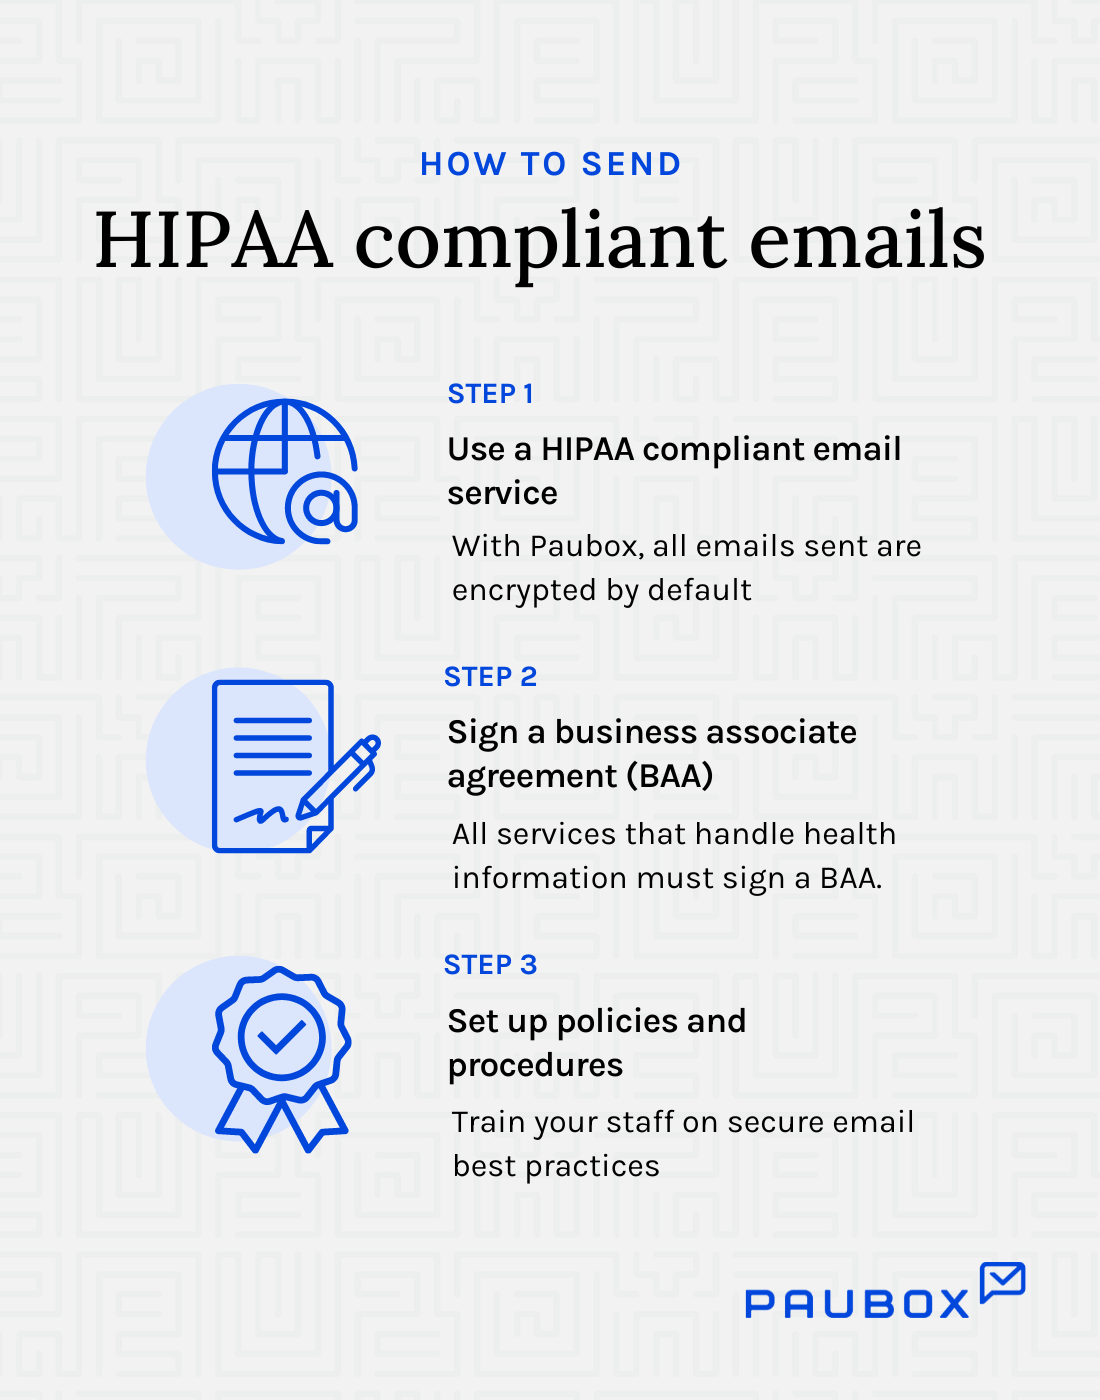 How to send HIPAA compliant email infographic